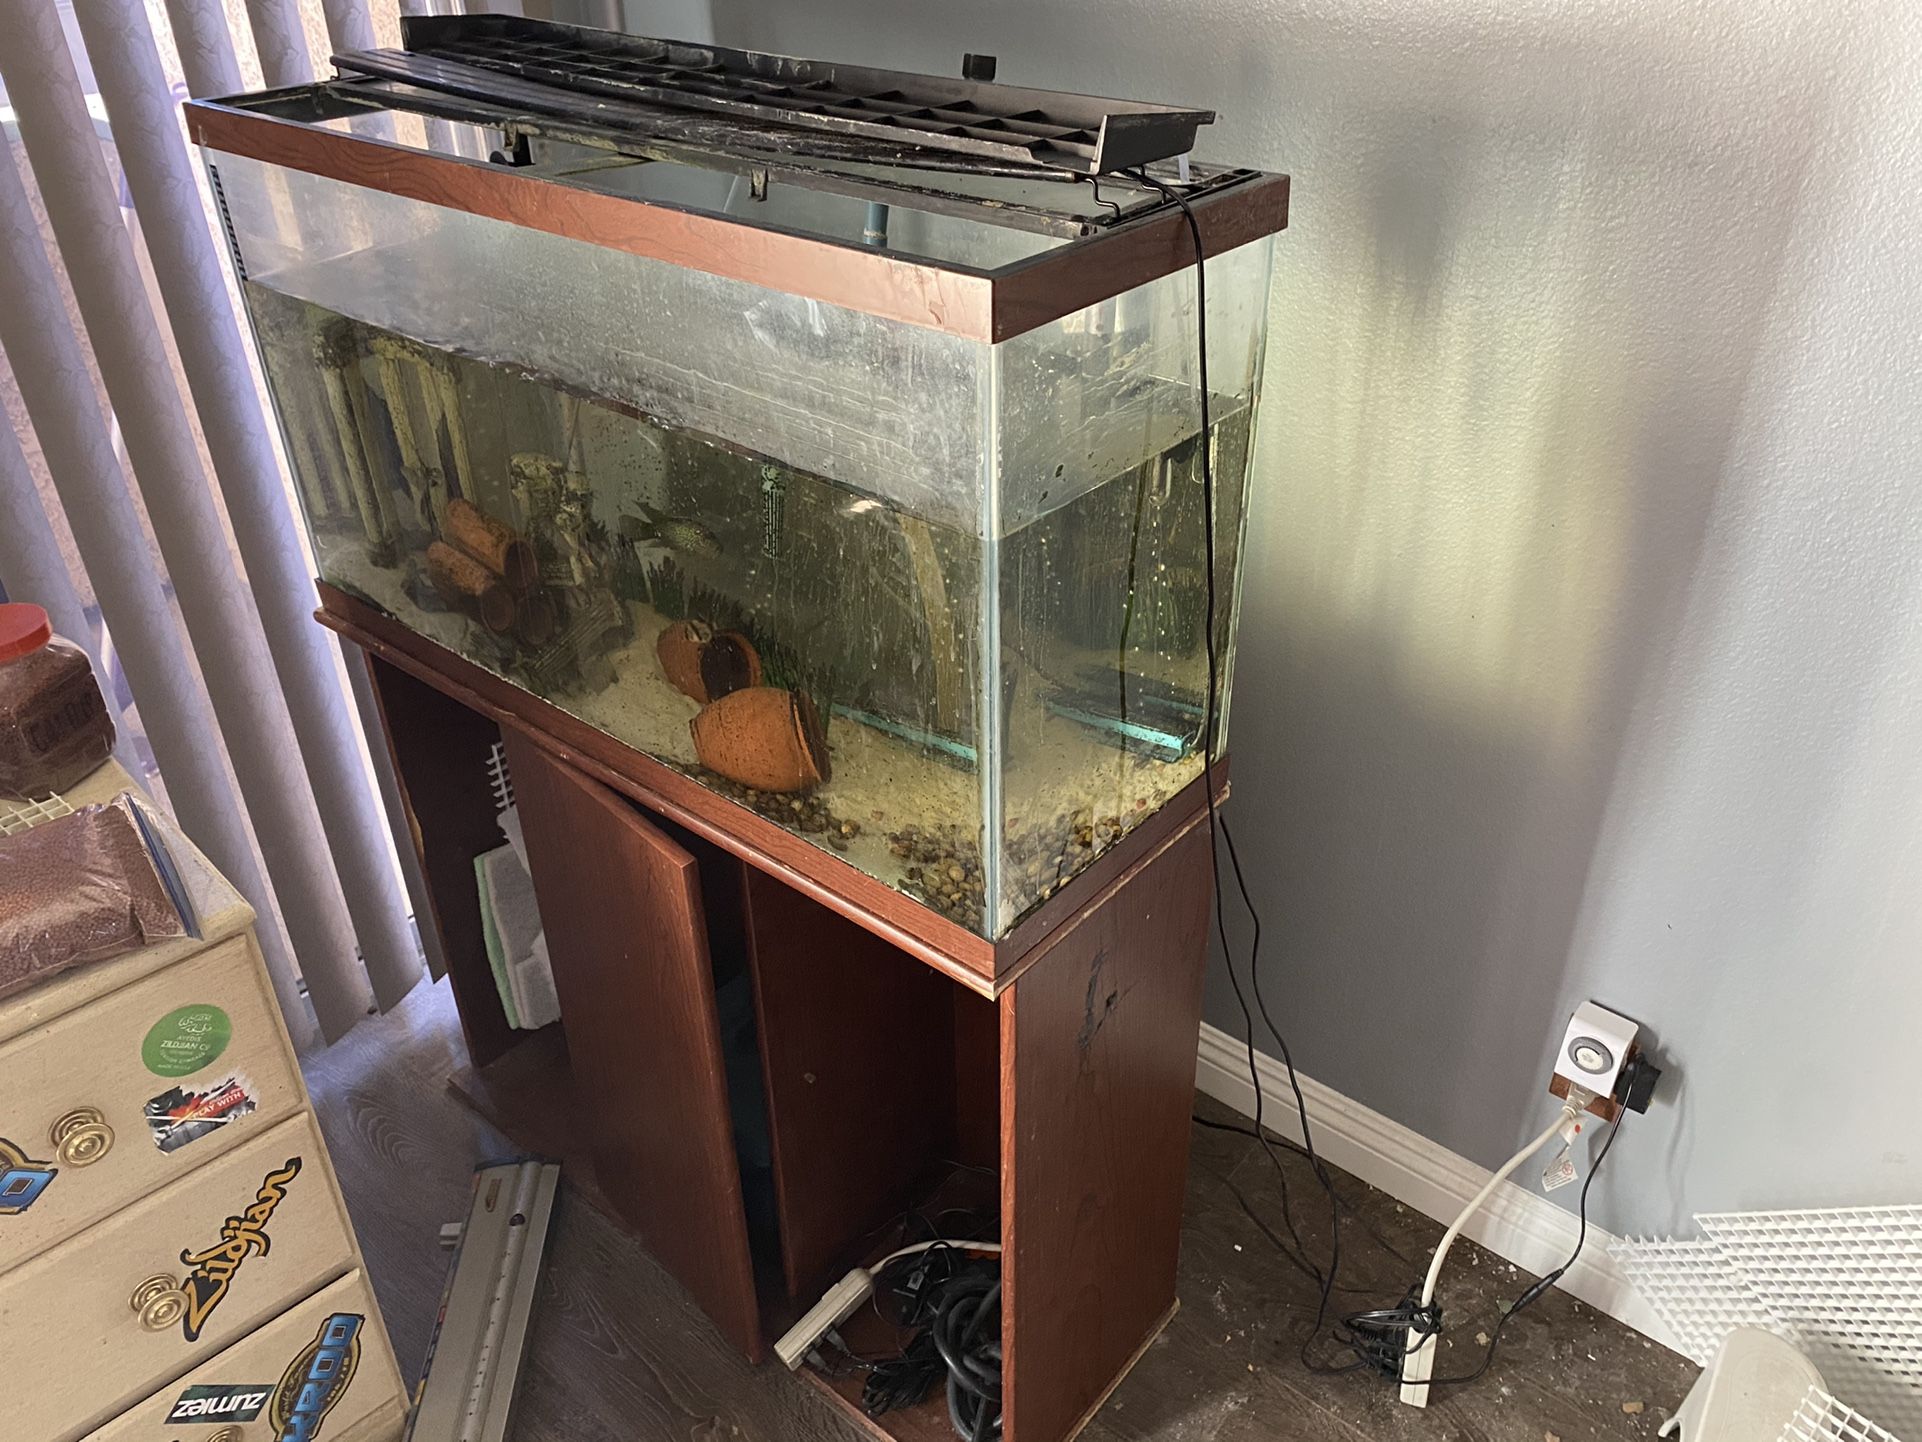 Medium Sized Fish Tank With Fish And Filter